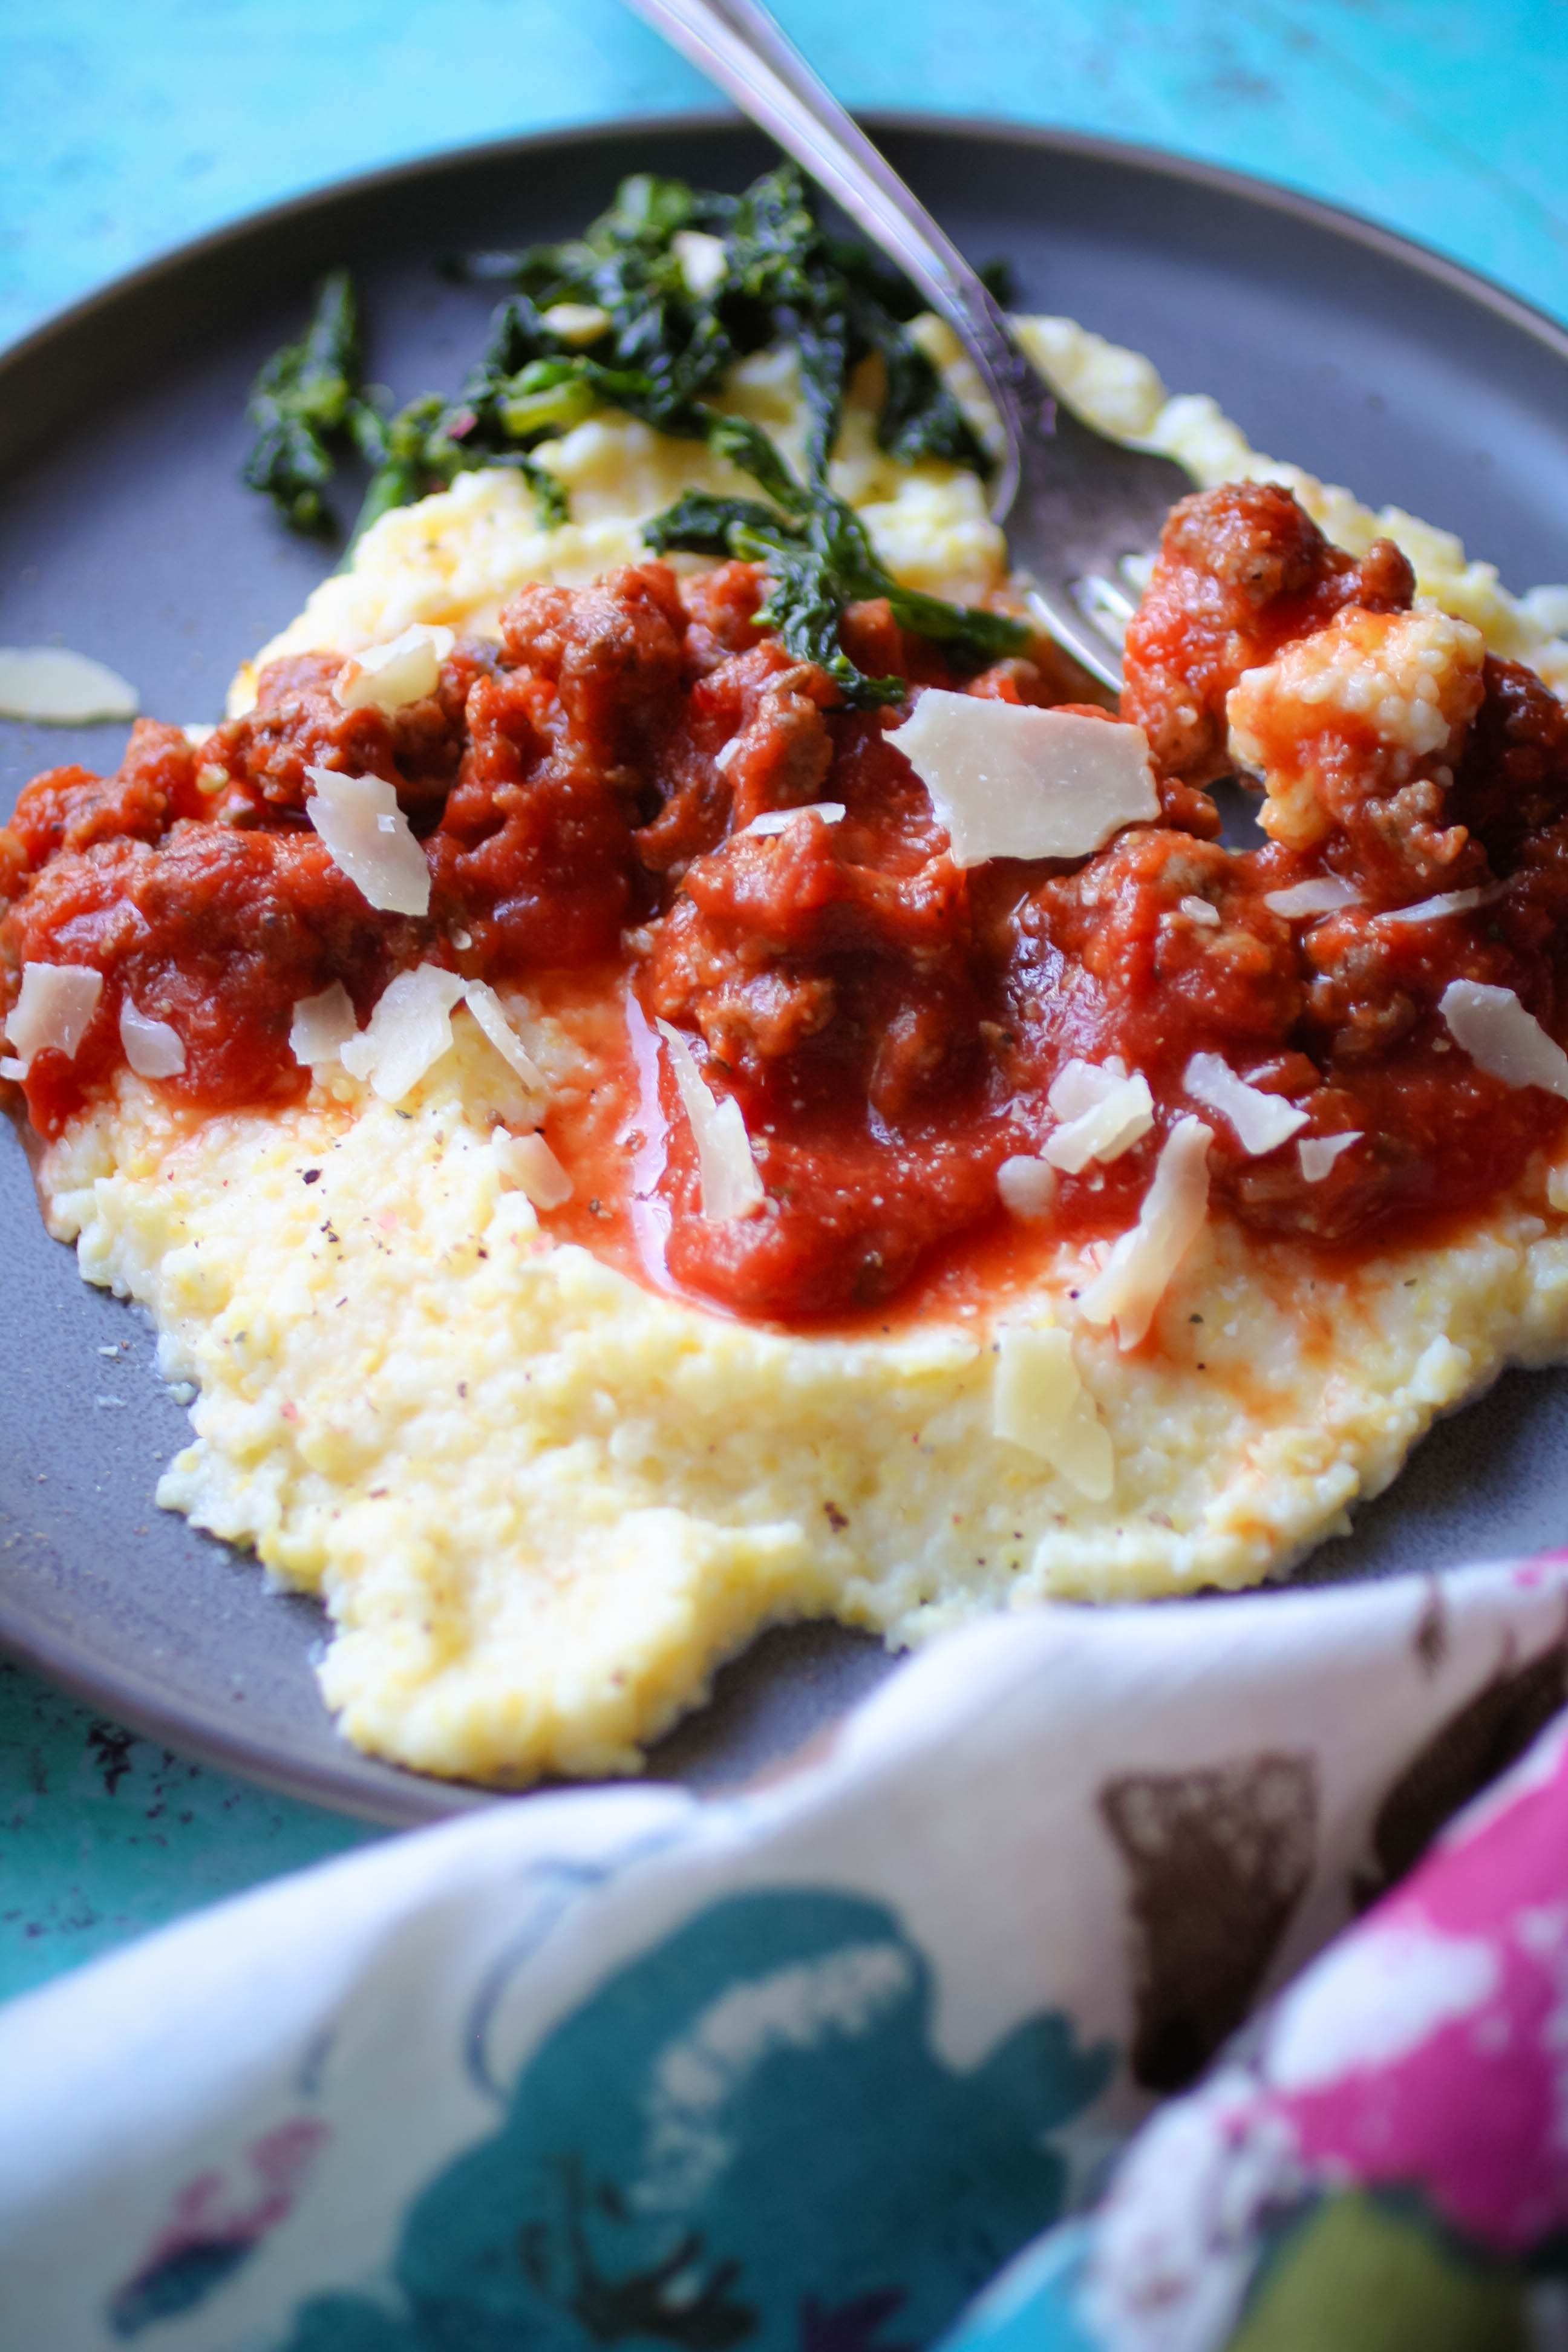 Polenta with Sausage and Red Sauce is a hearty and warming dish. Polenta with Sausage and Red Sauce makes a great main dish.